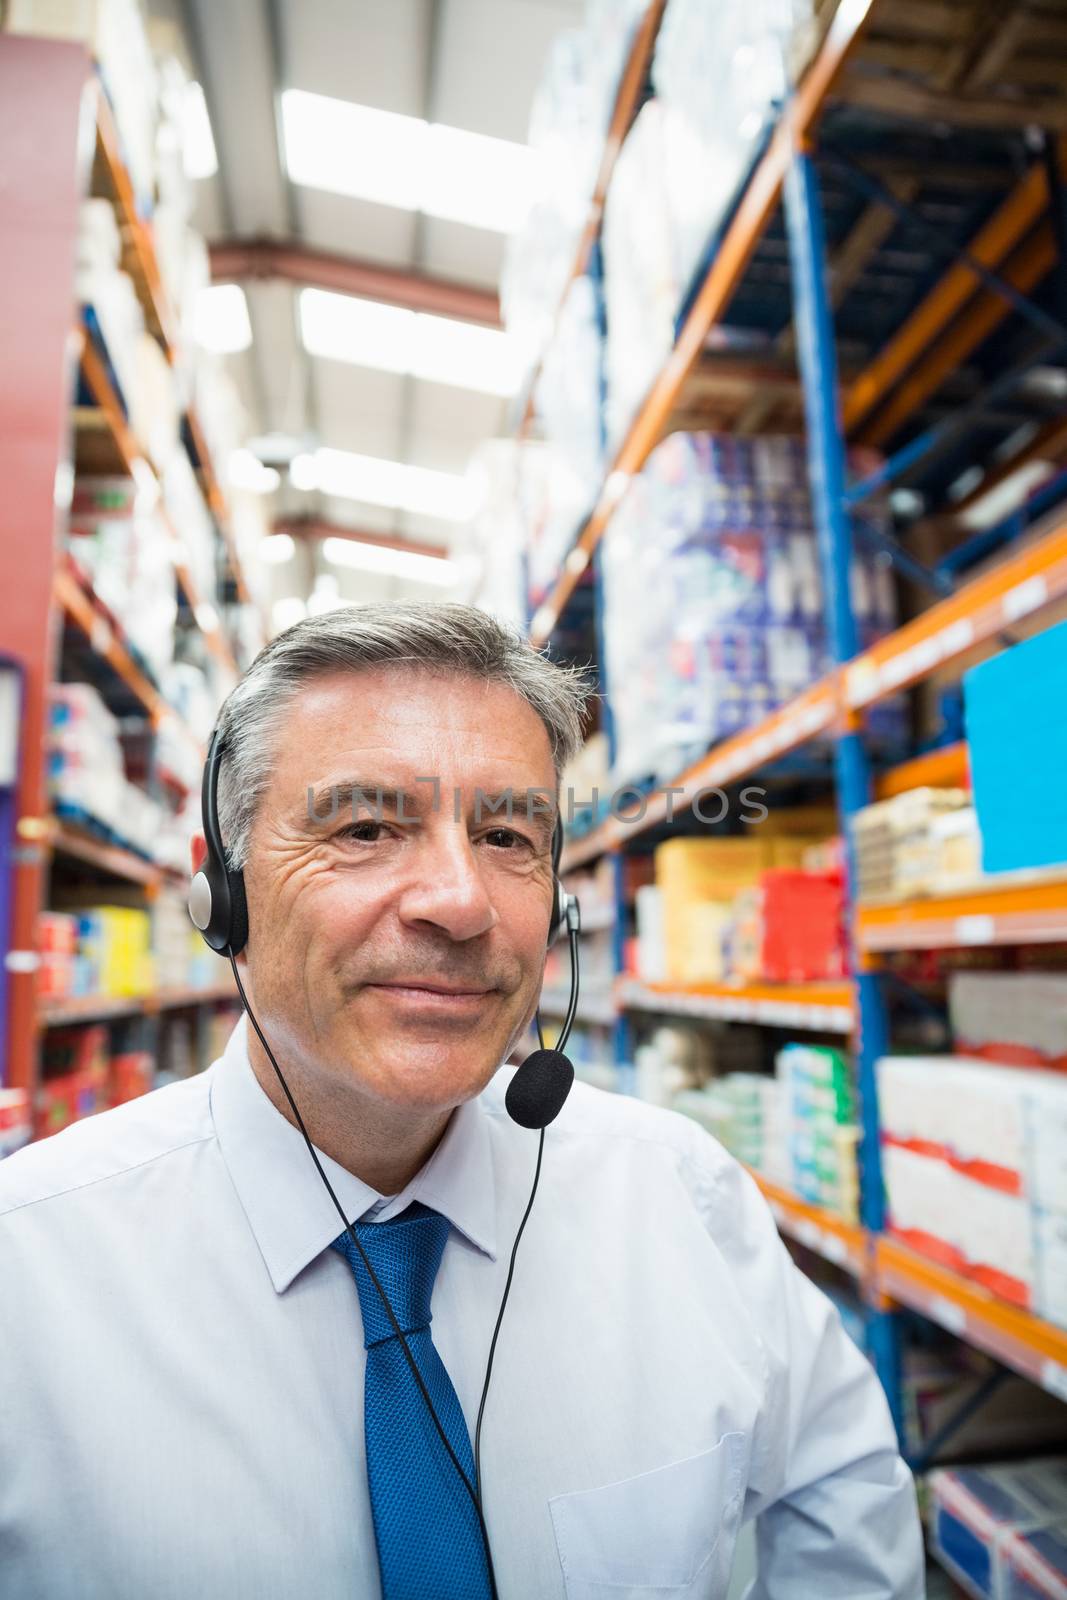 Warehouse manager giving orders on headset in a large warehouse